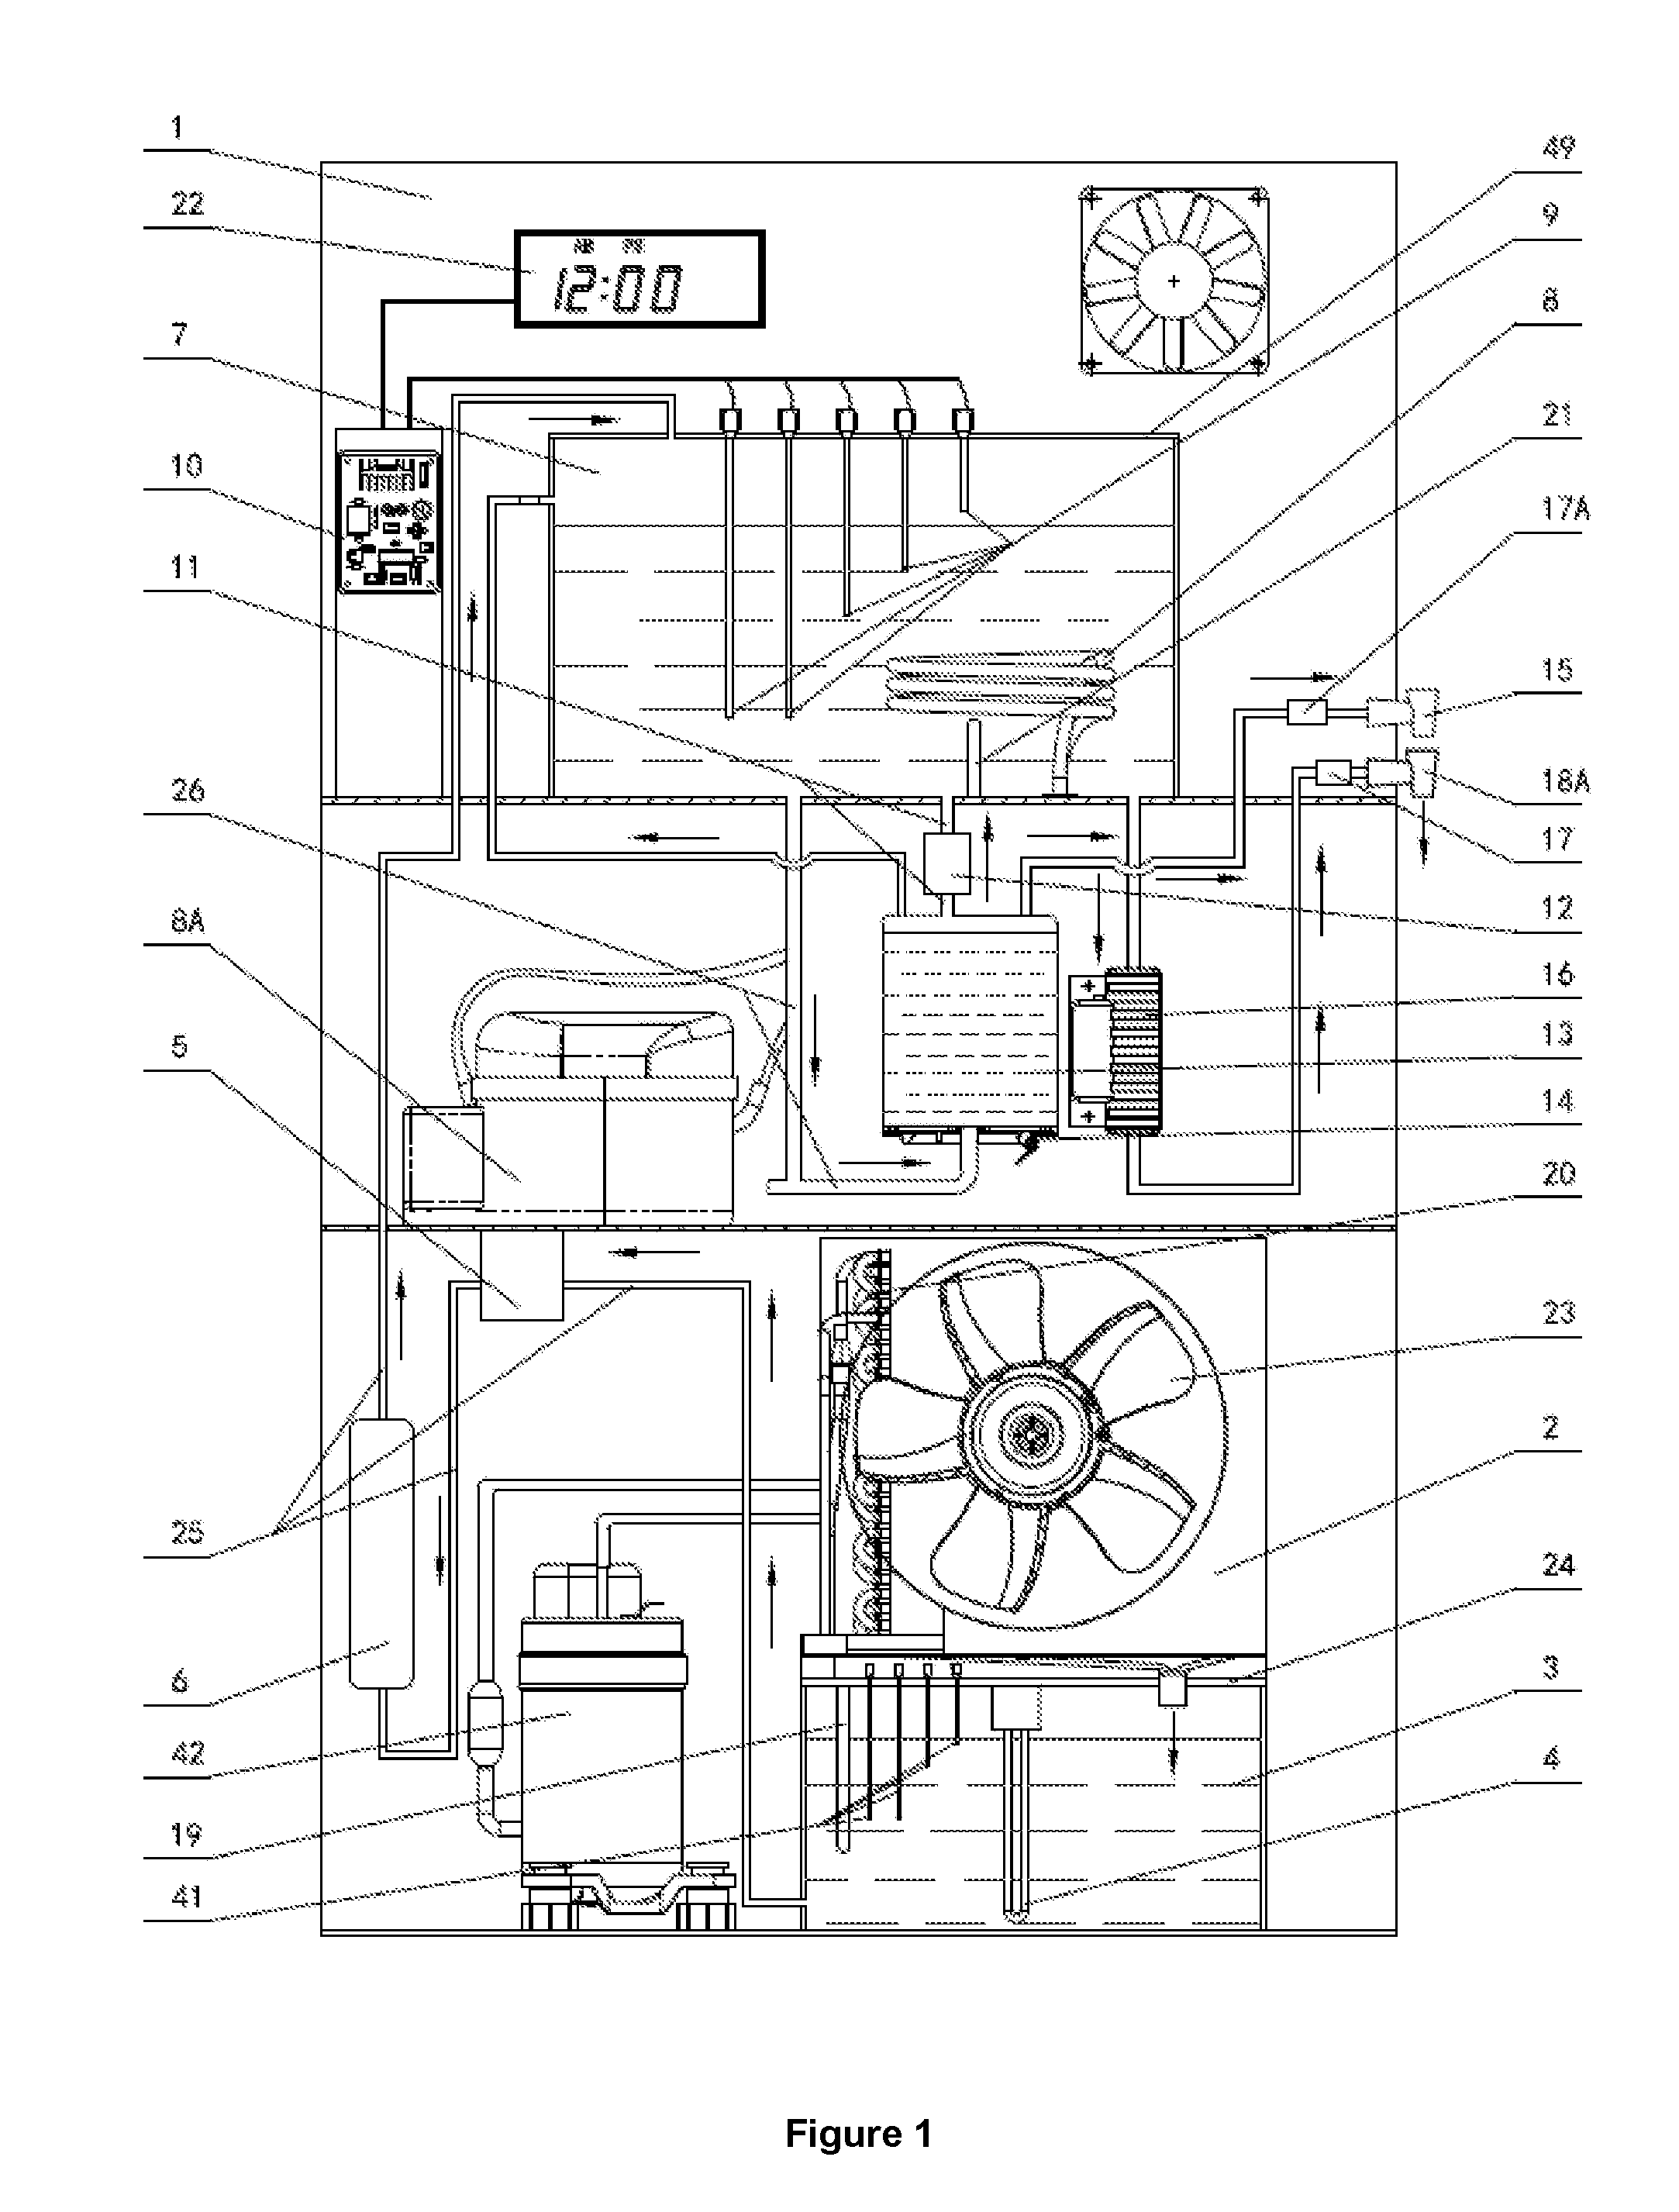 Devices and methods for collecting, sanitizing, and dispensing condensed forms of atmospheric water